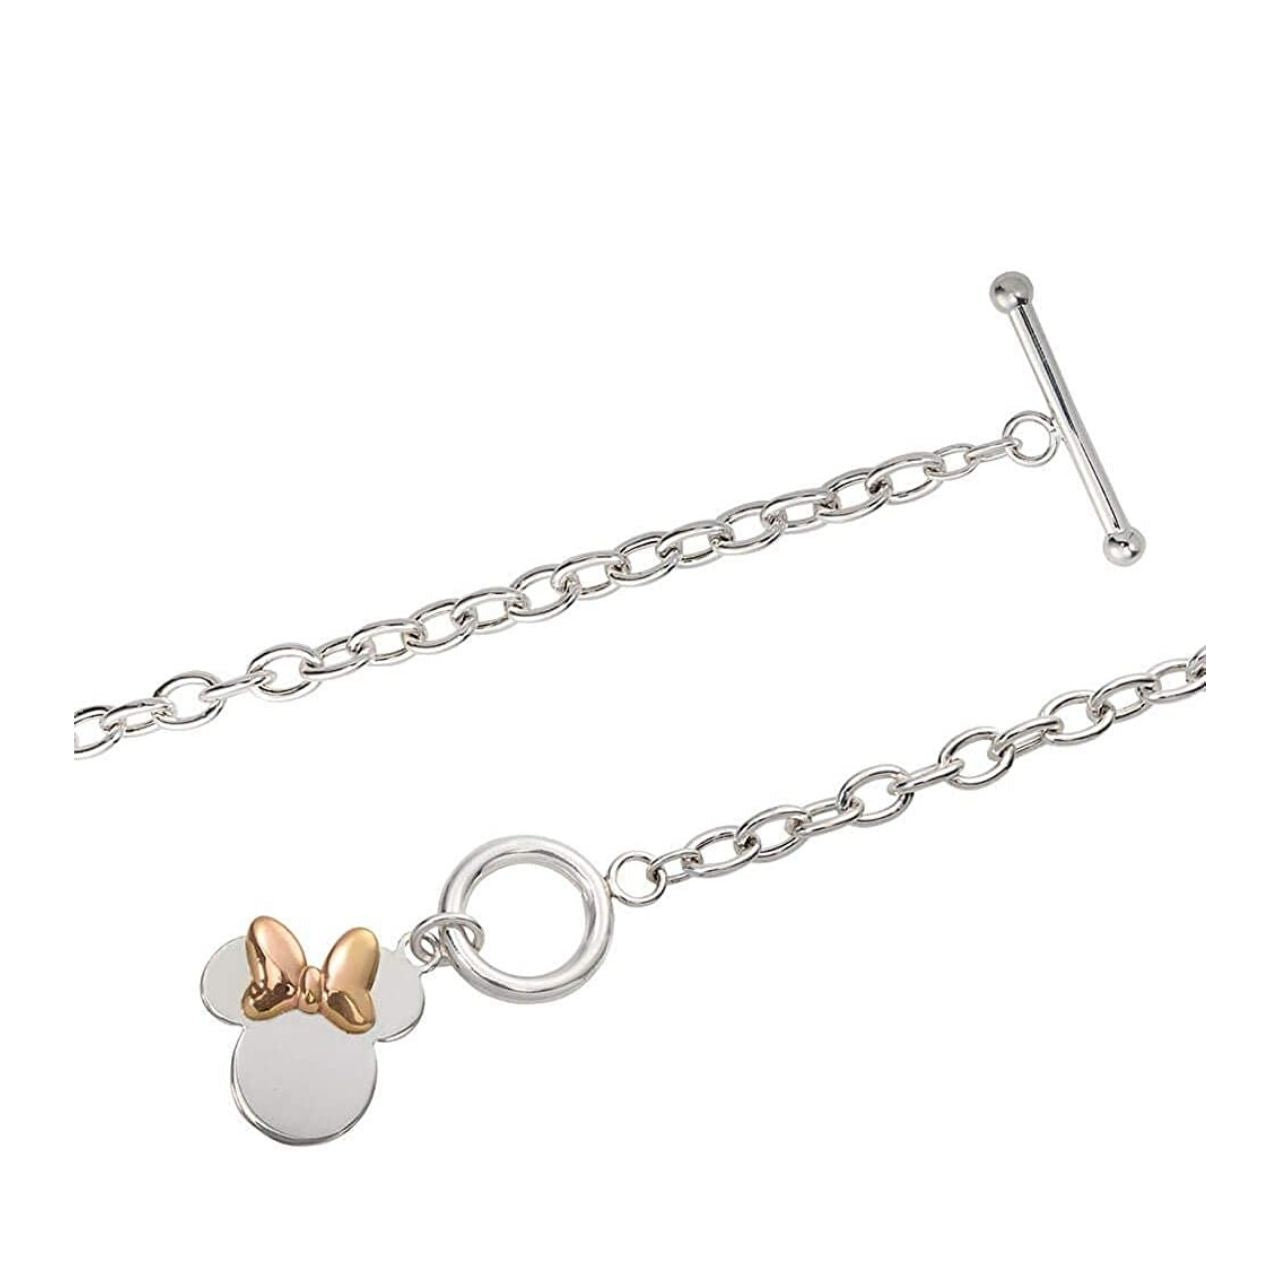 Peers Hardy Disney Minnie Mouse Silver Bracelet with Rose Gold Bow  Stunning sterling silver bracelet feature the Disney Minnie Mouse famous silhouette and is complete with an on trend rose gold coloured bow.  Trendy and fashionable two tone design, the Disney Minnie Mouse Silhouette sterling silver bracelet add a chic, fun touch to any outfit.